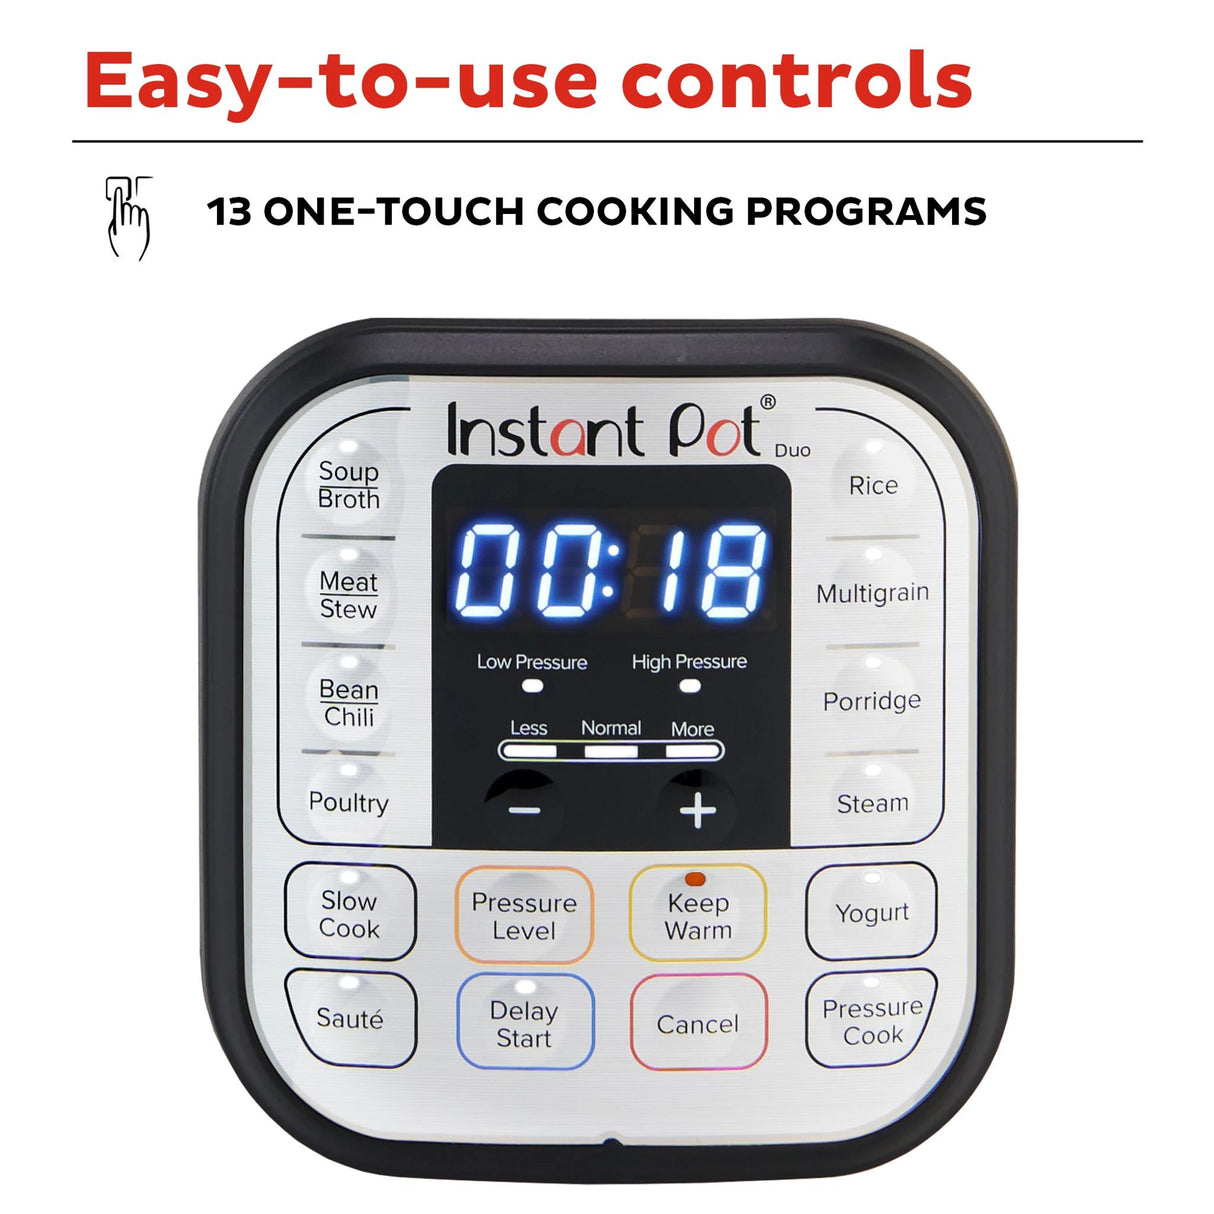  Instant Pot Duo 6-qt Multi-Use Pressure Cooker with text Easy to use controls